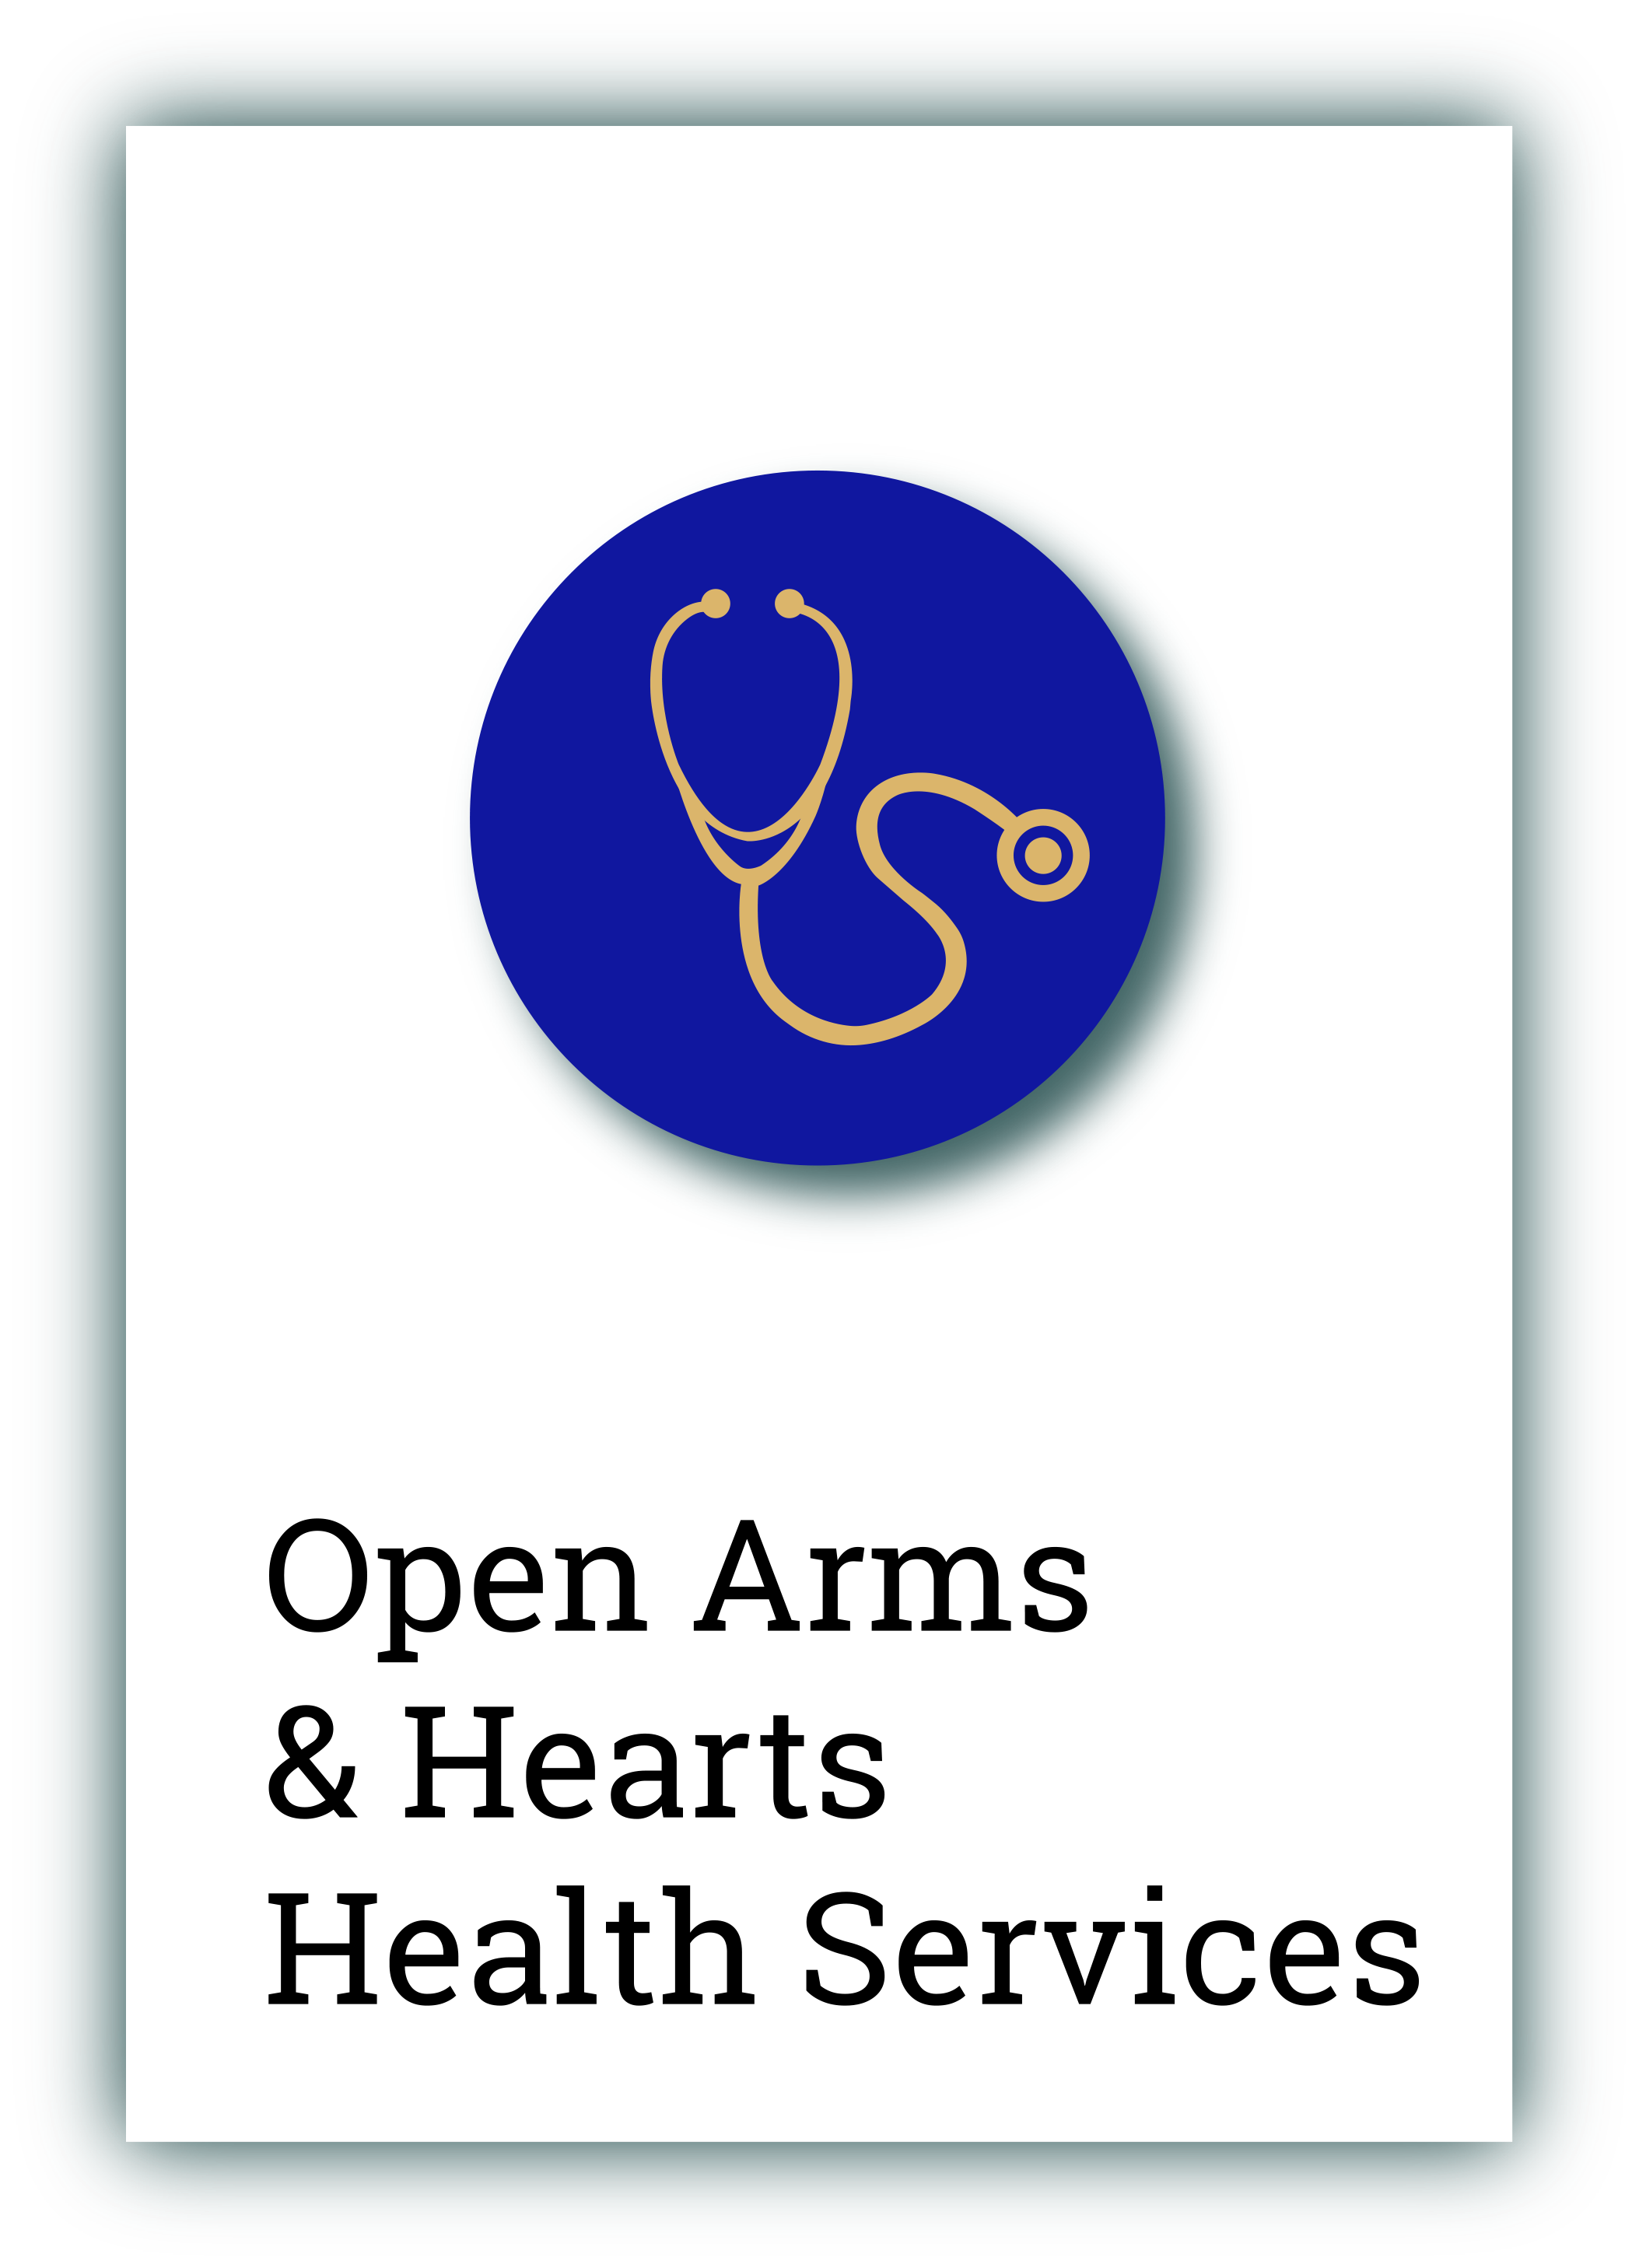 Open Arms & Hearts Health Services 2